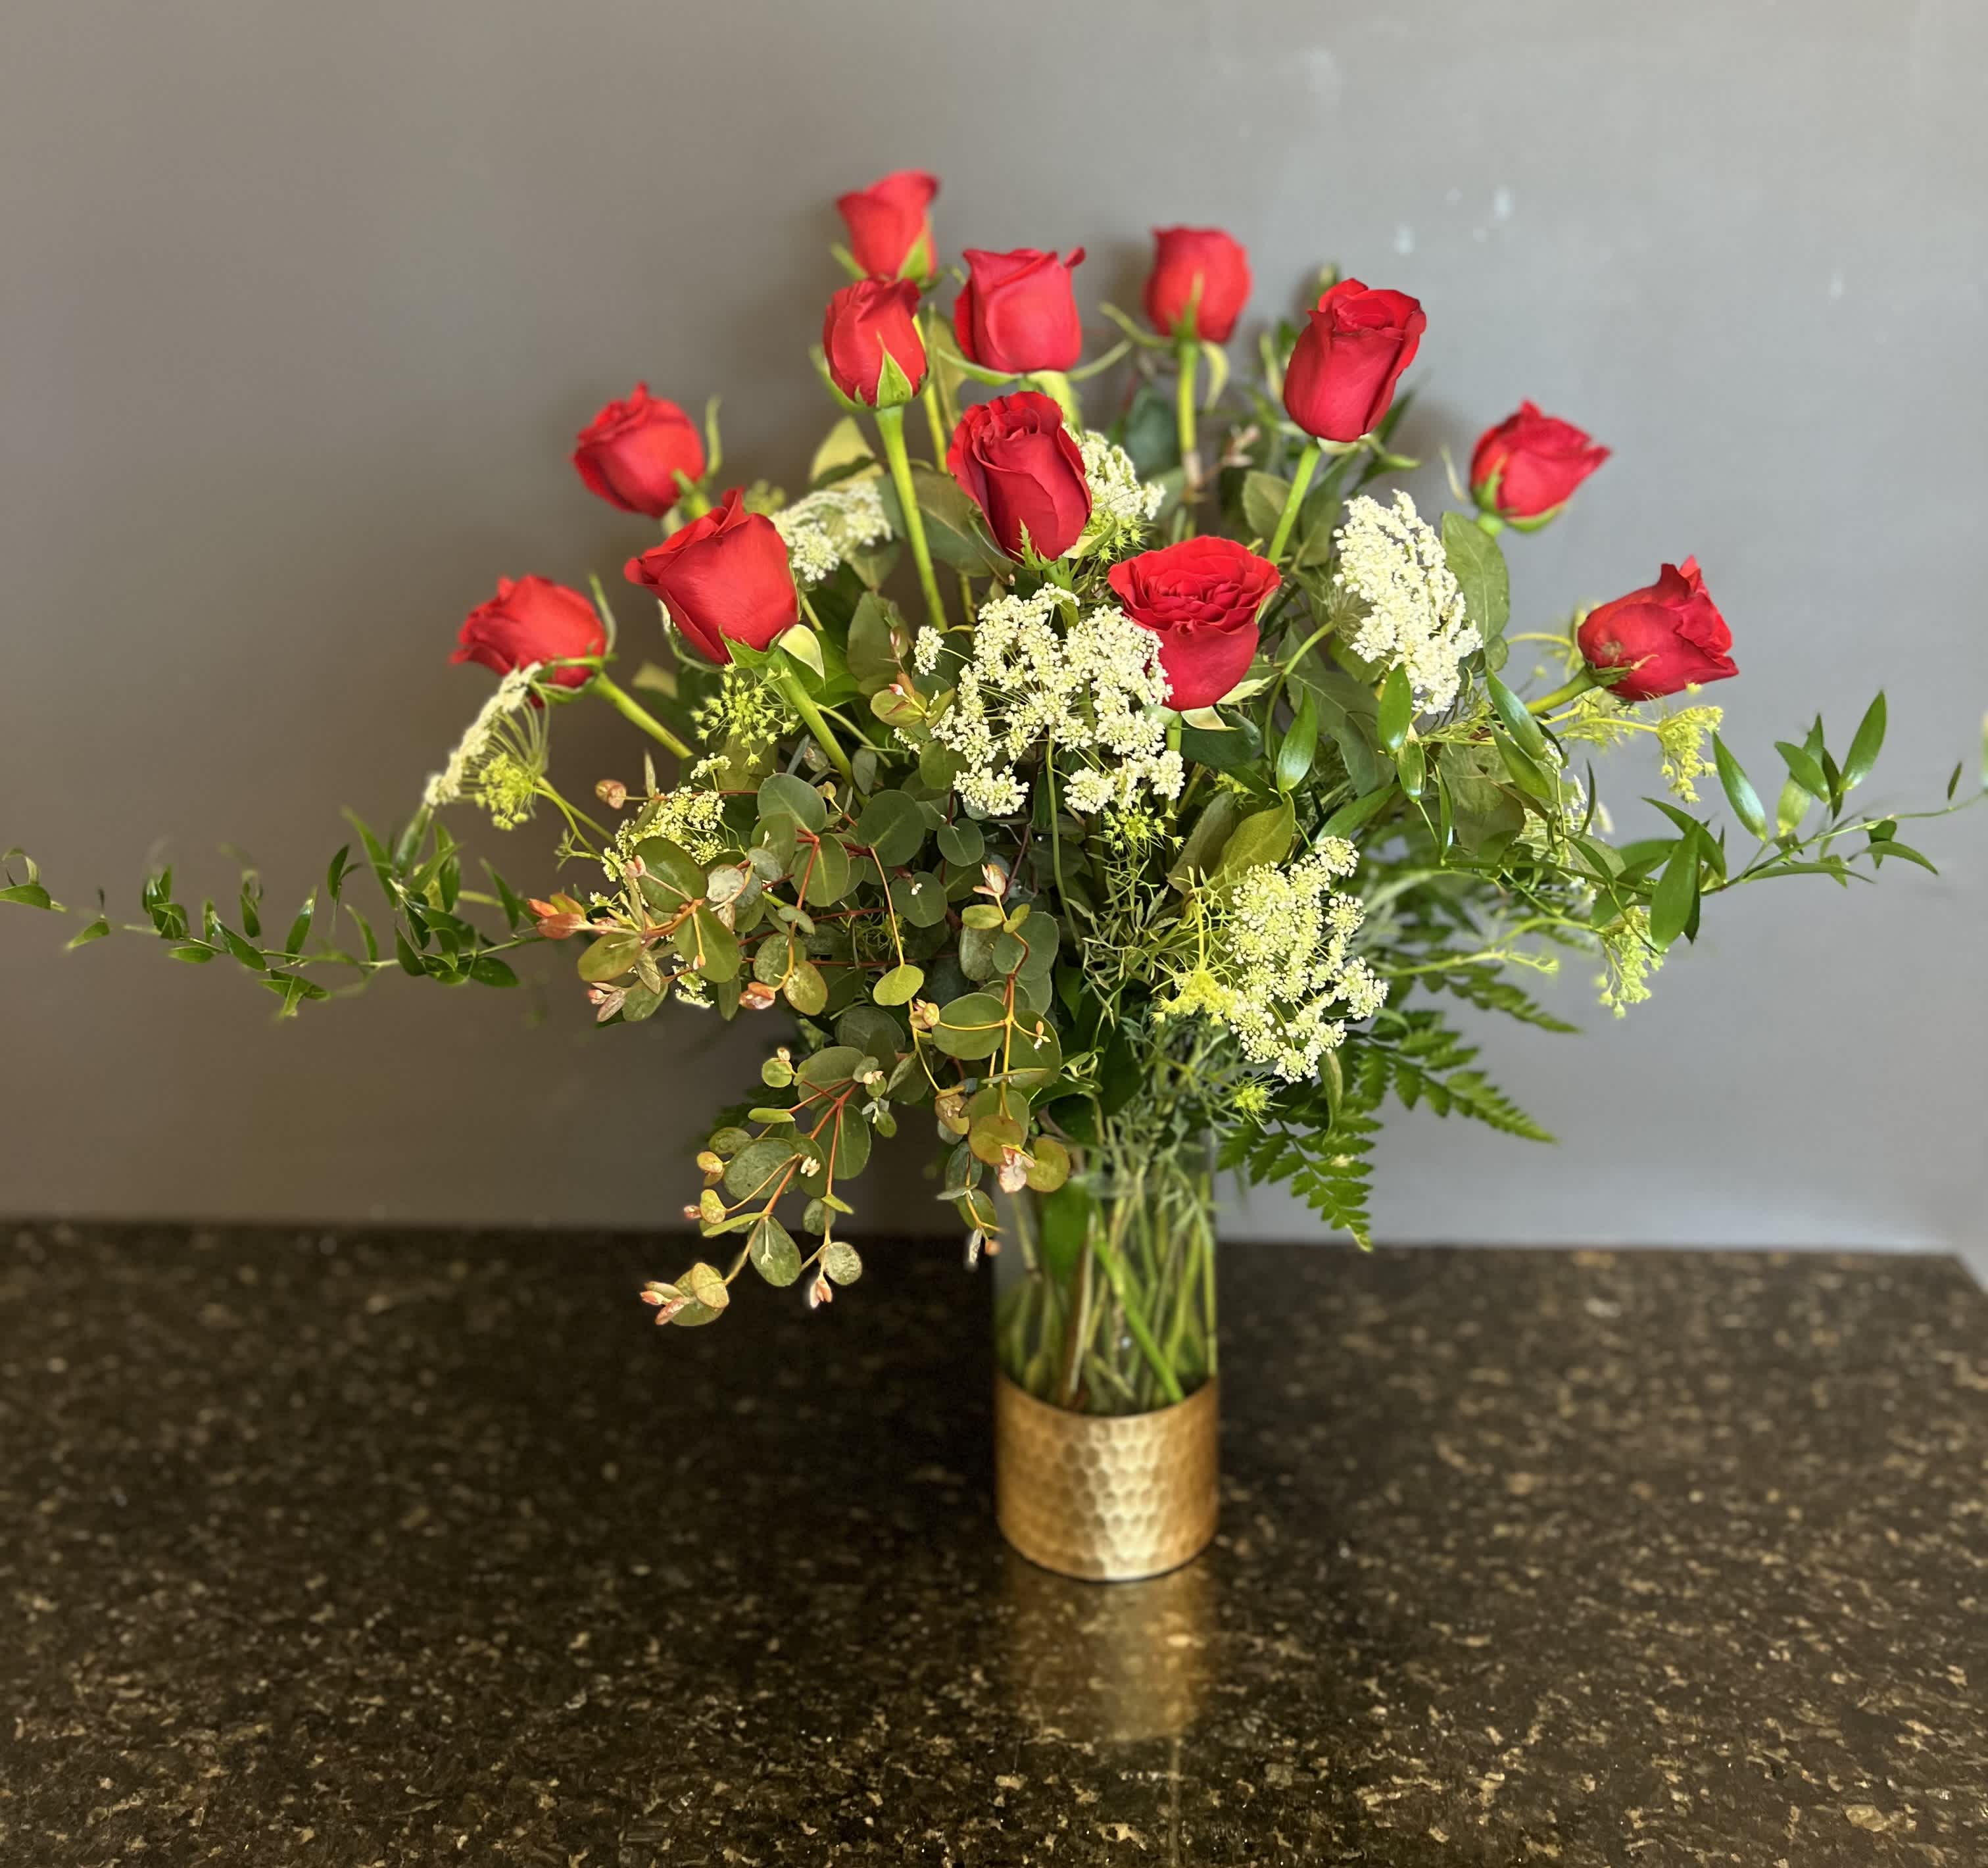 Elegant Dozen Roses - 12 long stem red roses arranged in a designer gold bottomed vase with premium greenery and filler for the extra elegant and classy look